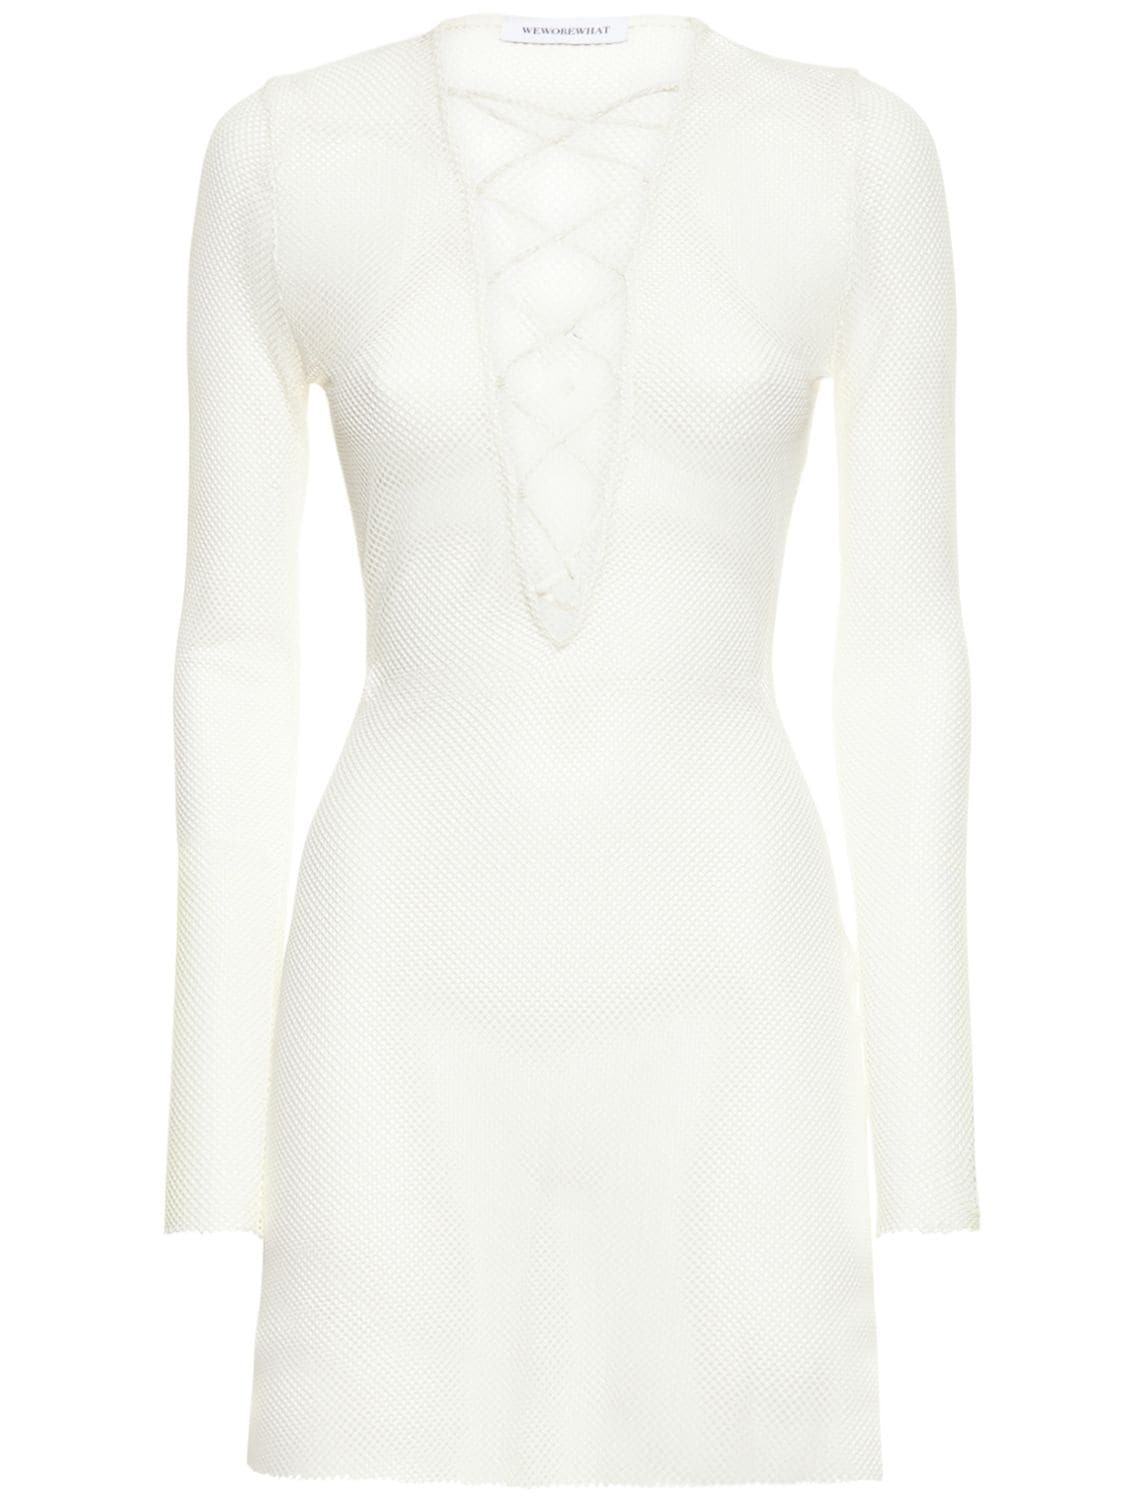 WEWOREWHAT V Neck Lace-up Net Mini Dress in white